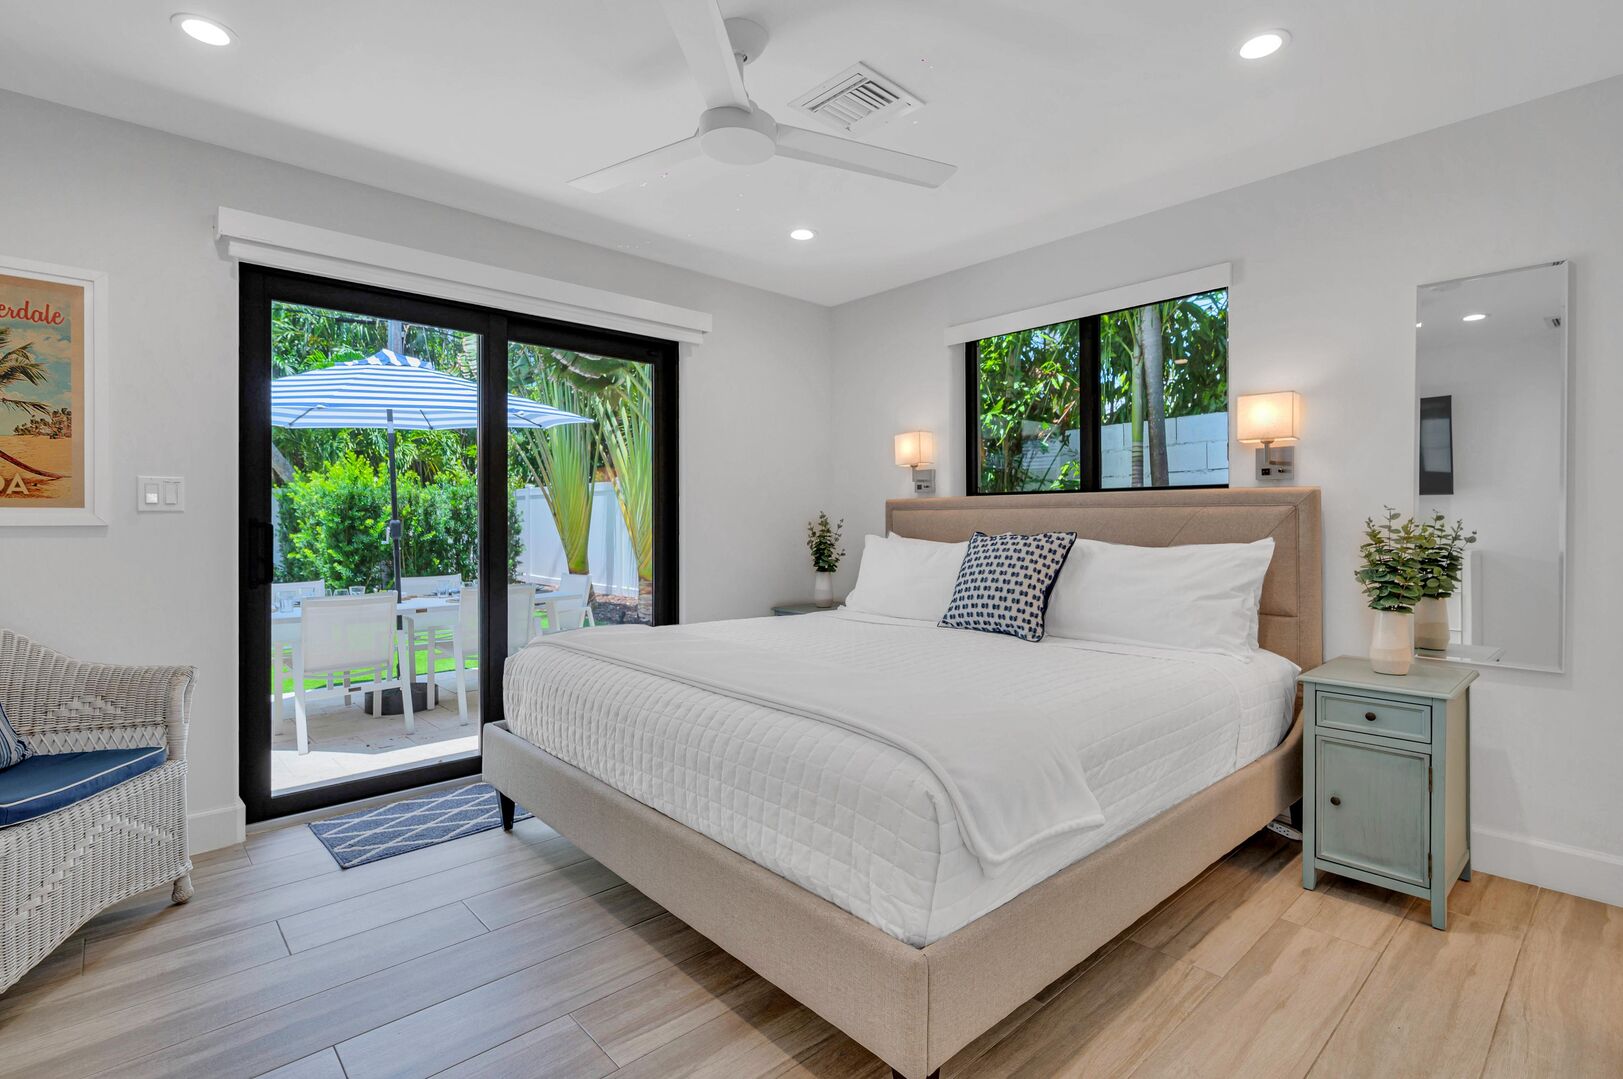 The second bedroom features a King bed, En-suite Bath, Smart TV, and pool access